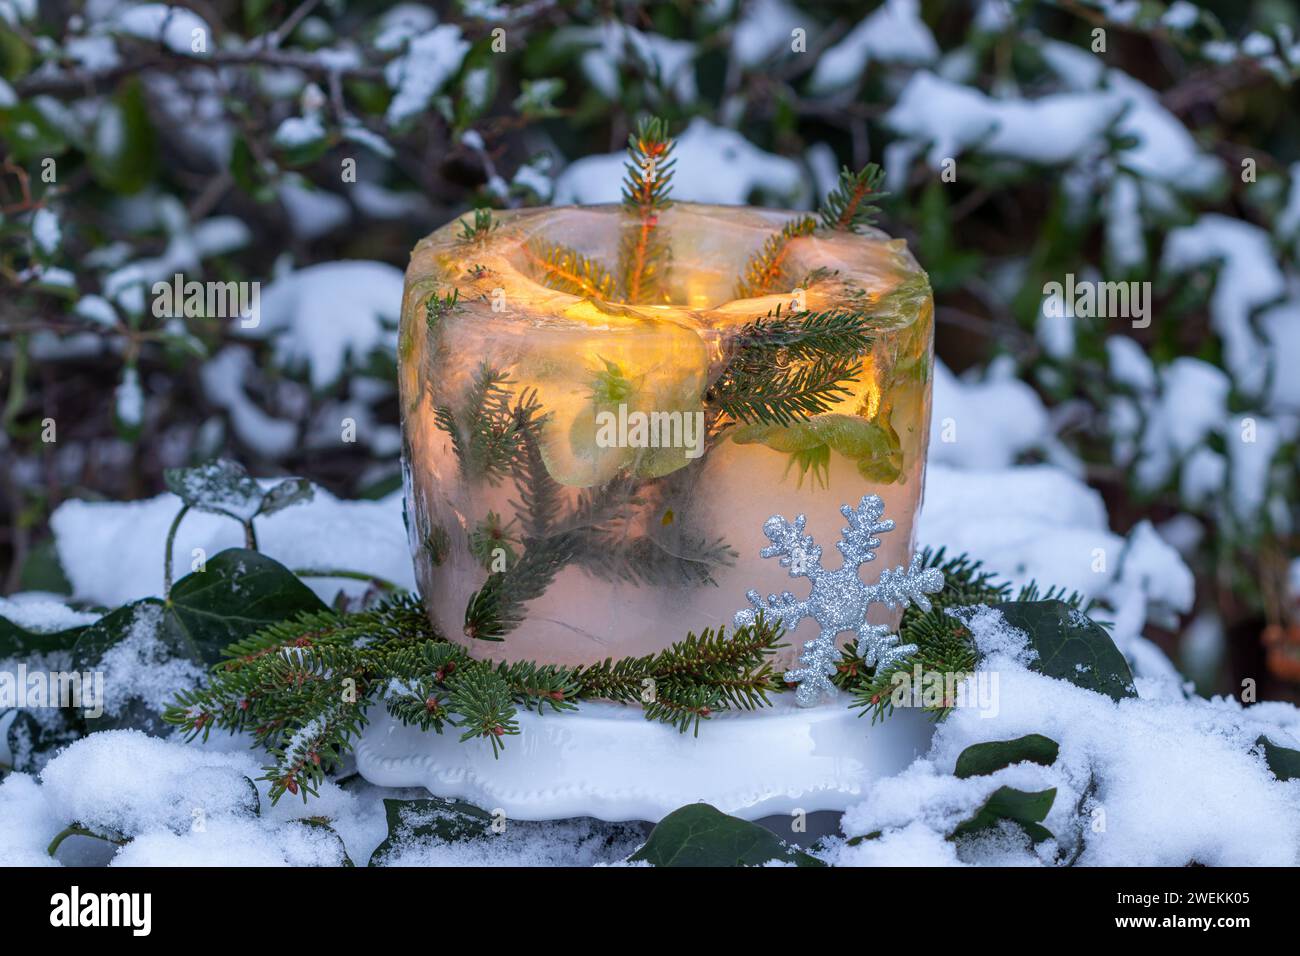 ice lantern with helleborus niger flowers and fir branches in winter garden Stock Photo